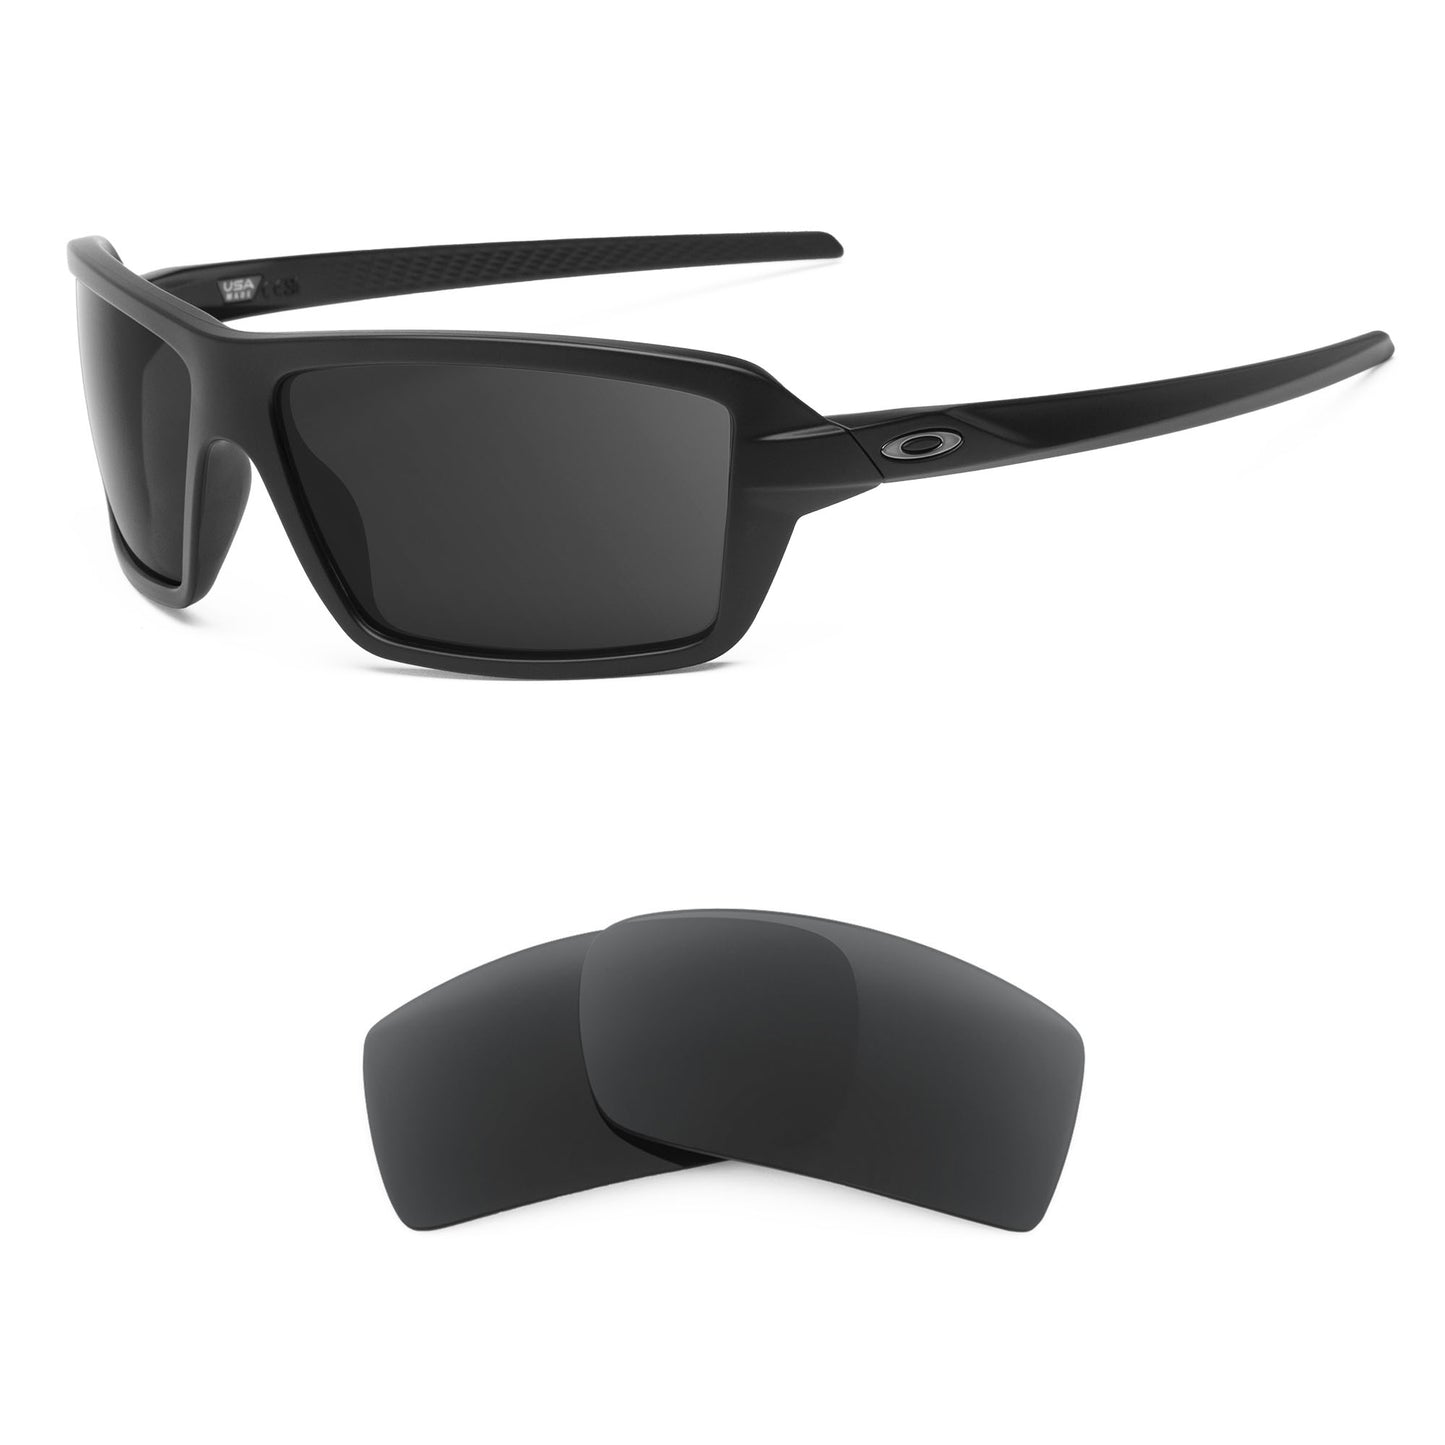 Oakley Cables sunglasses with replacement lenses